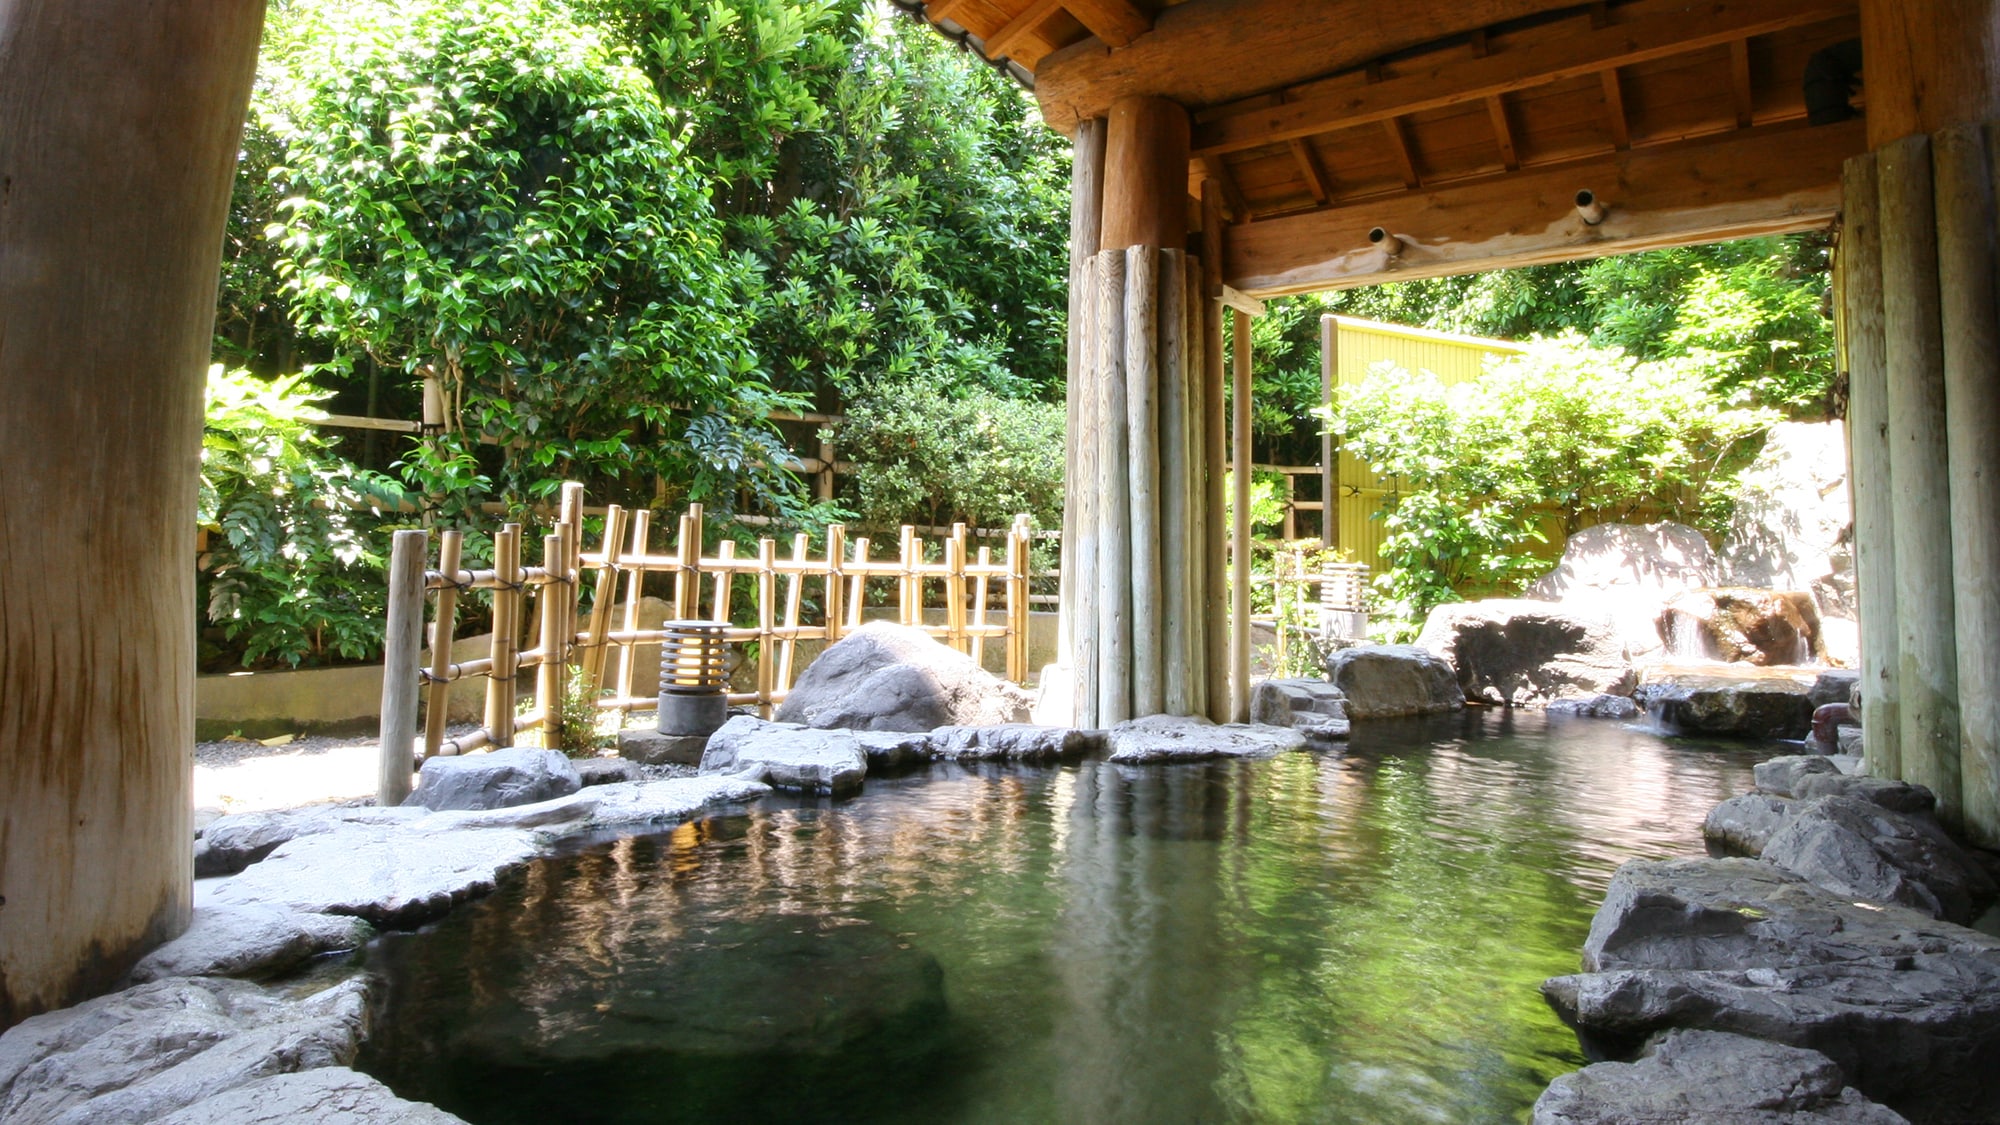  Large communal bath (open-air bath / male) & hellip; 100% free-flowing hot spring surrounded by greenery and rocks No heating <Guests free>